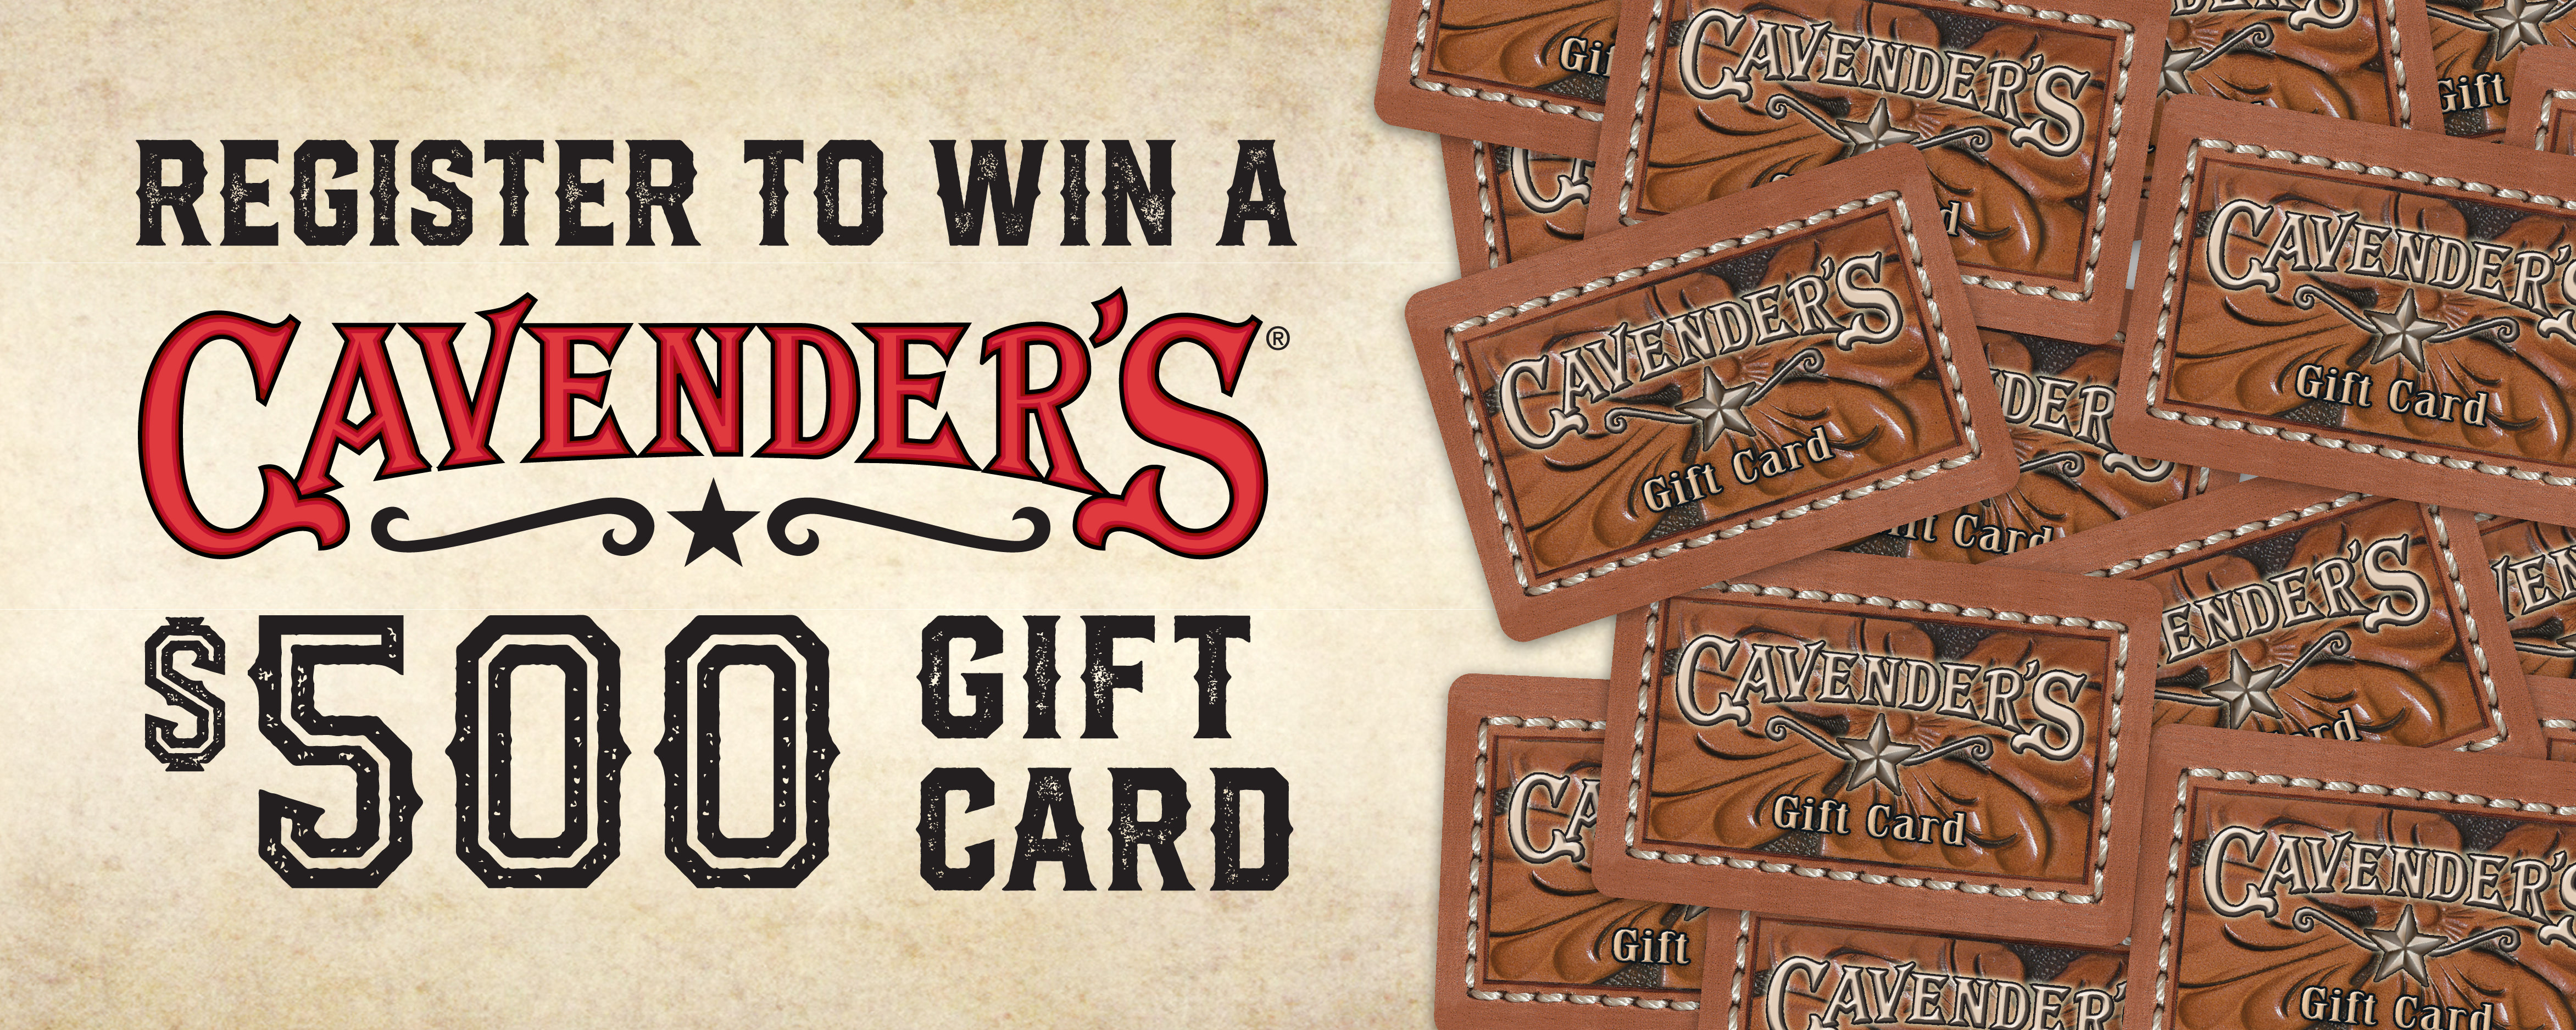 Enter For A Chance To Win A $500 Cavender's Gift Card!